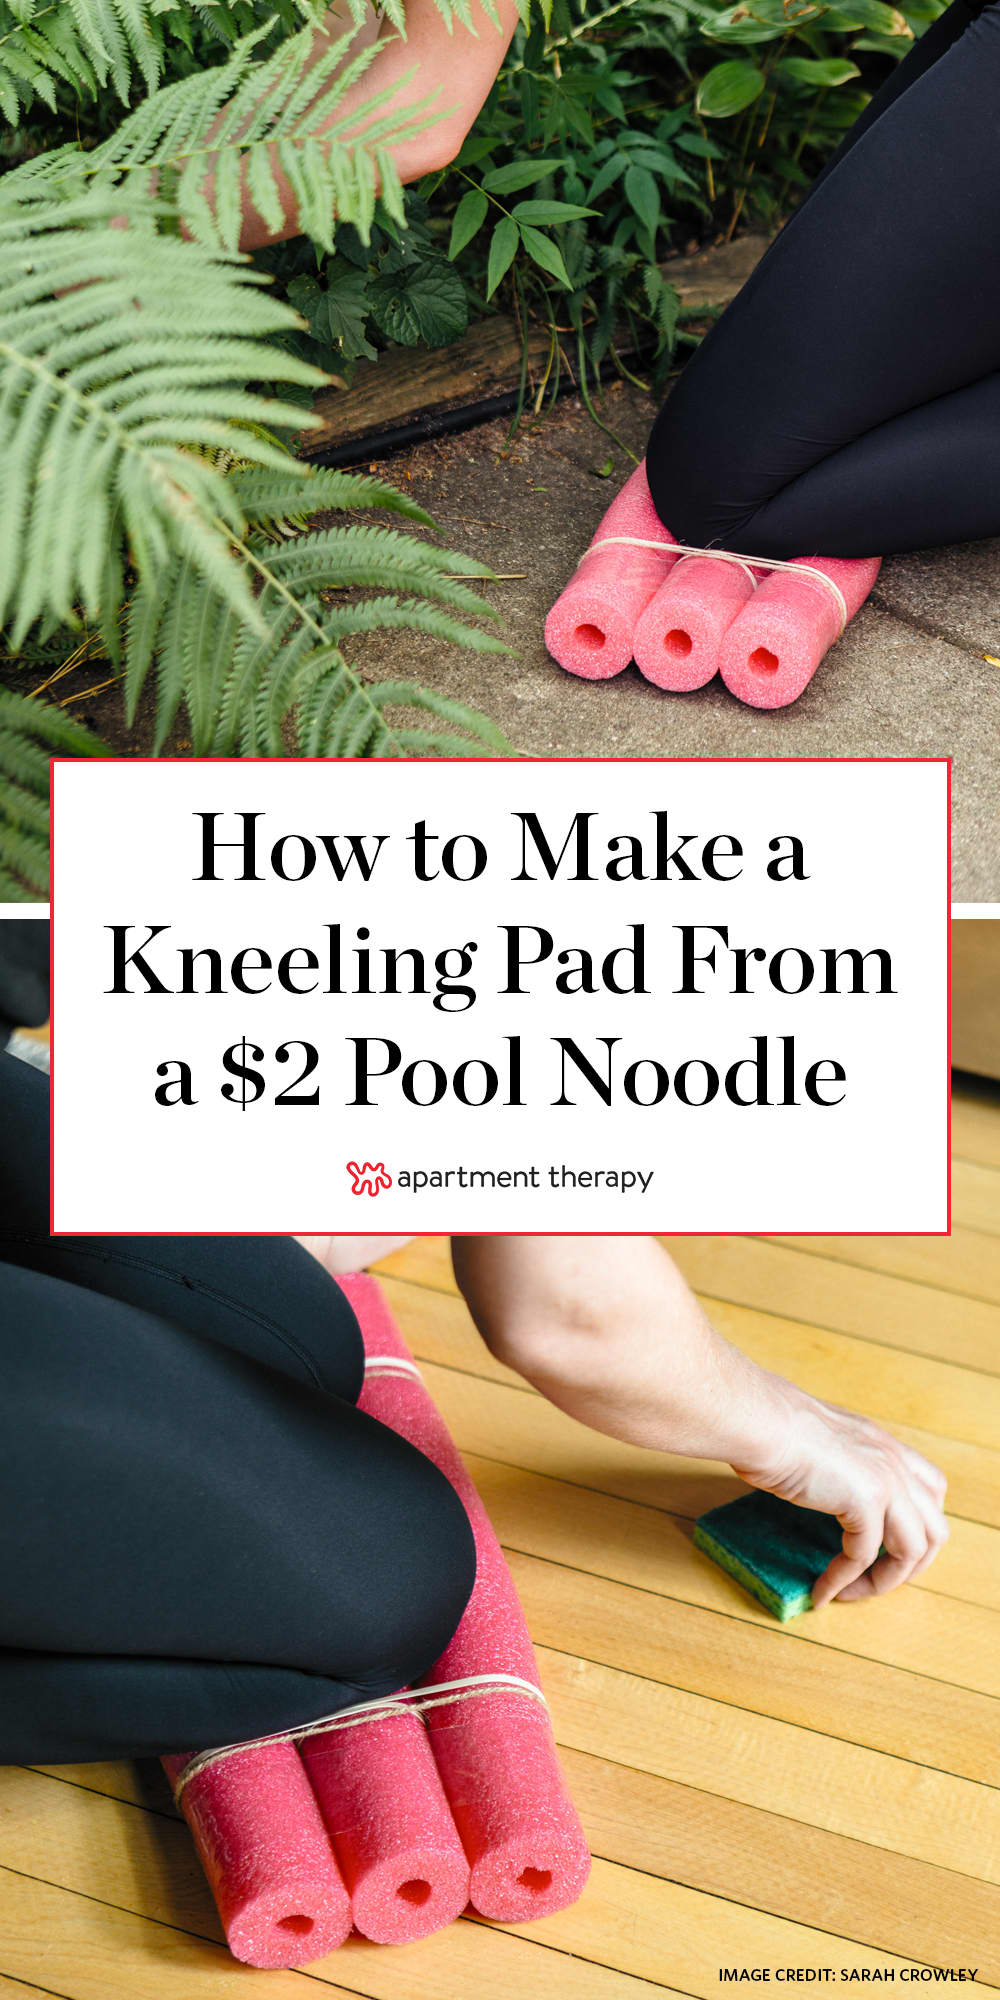 How to DIY a Kneeling Pad from a Pool Noodle